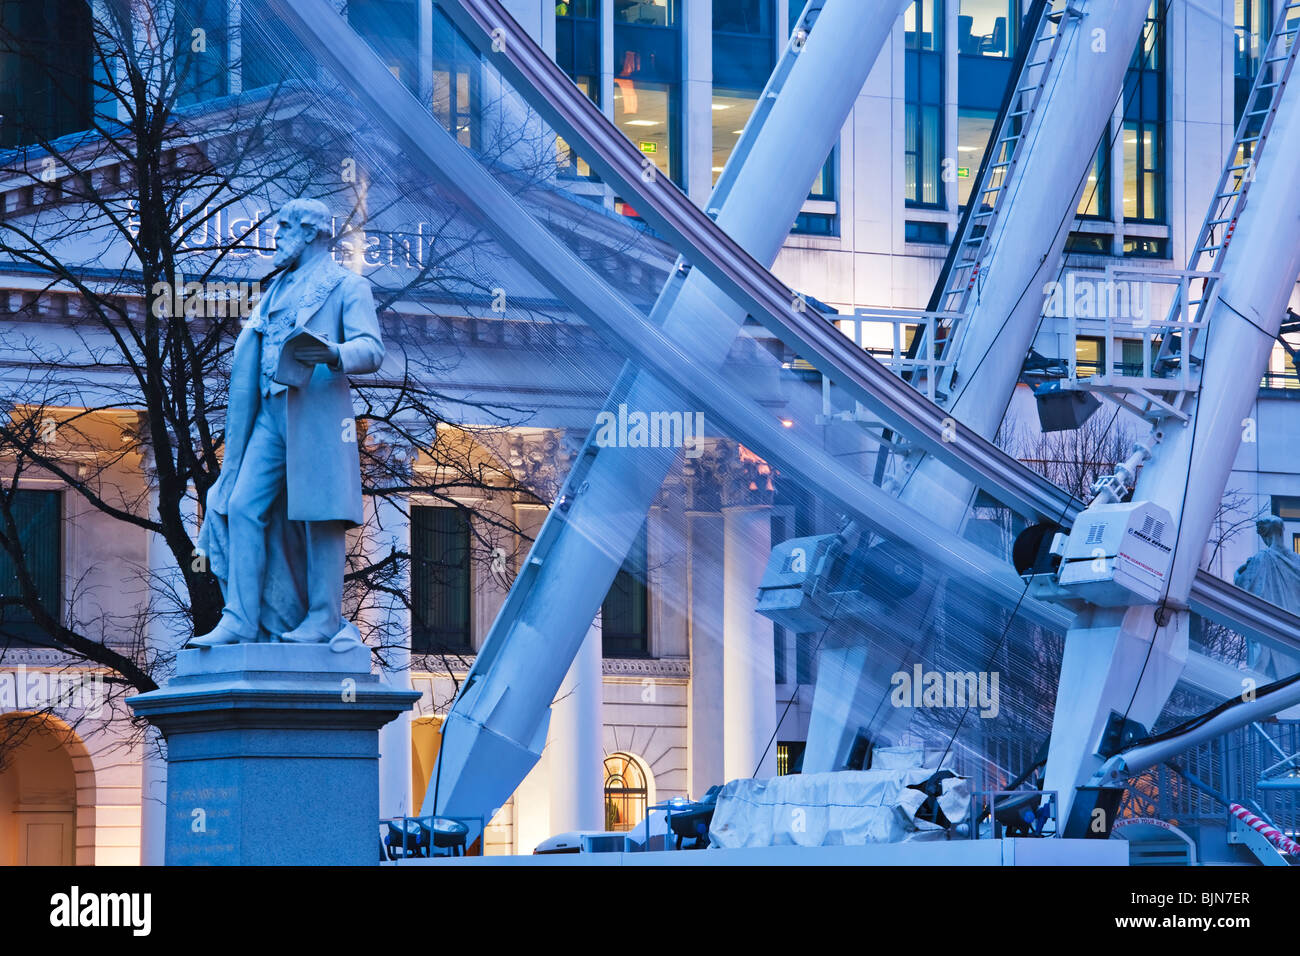 Statue of Sir James Horner Haslett in front of the Belfast wheel in the grounds of the City Hall, Northern Ireland Stock Photo